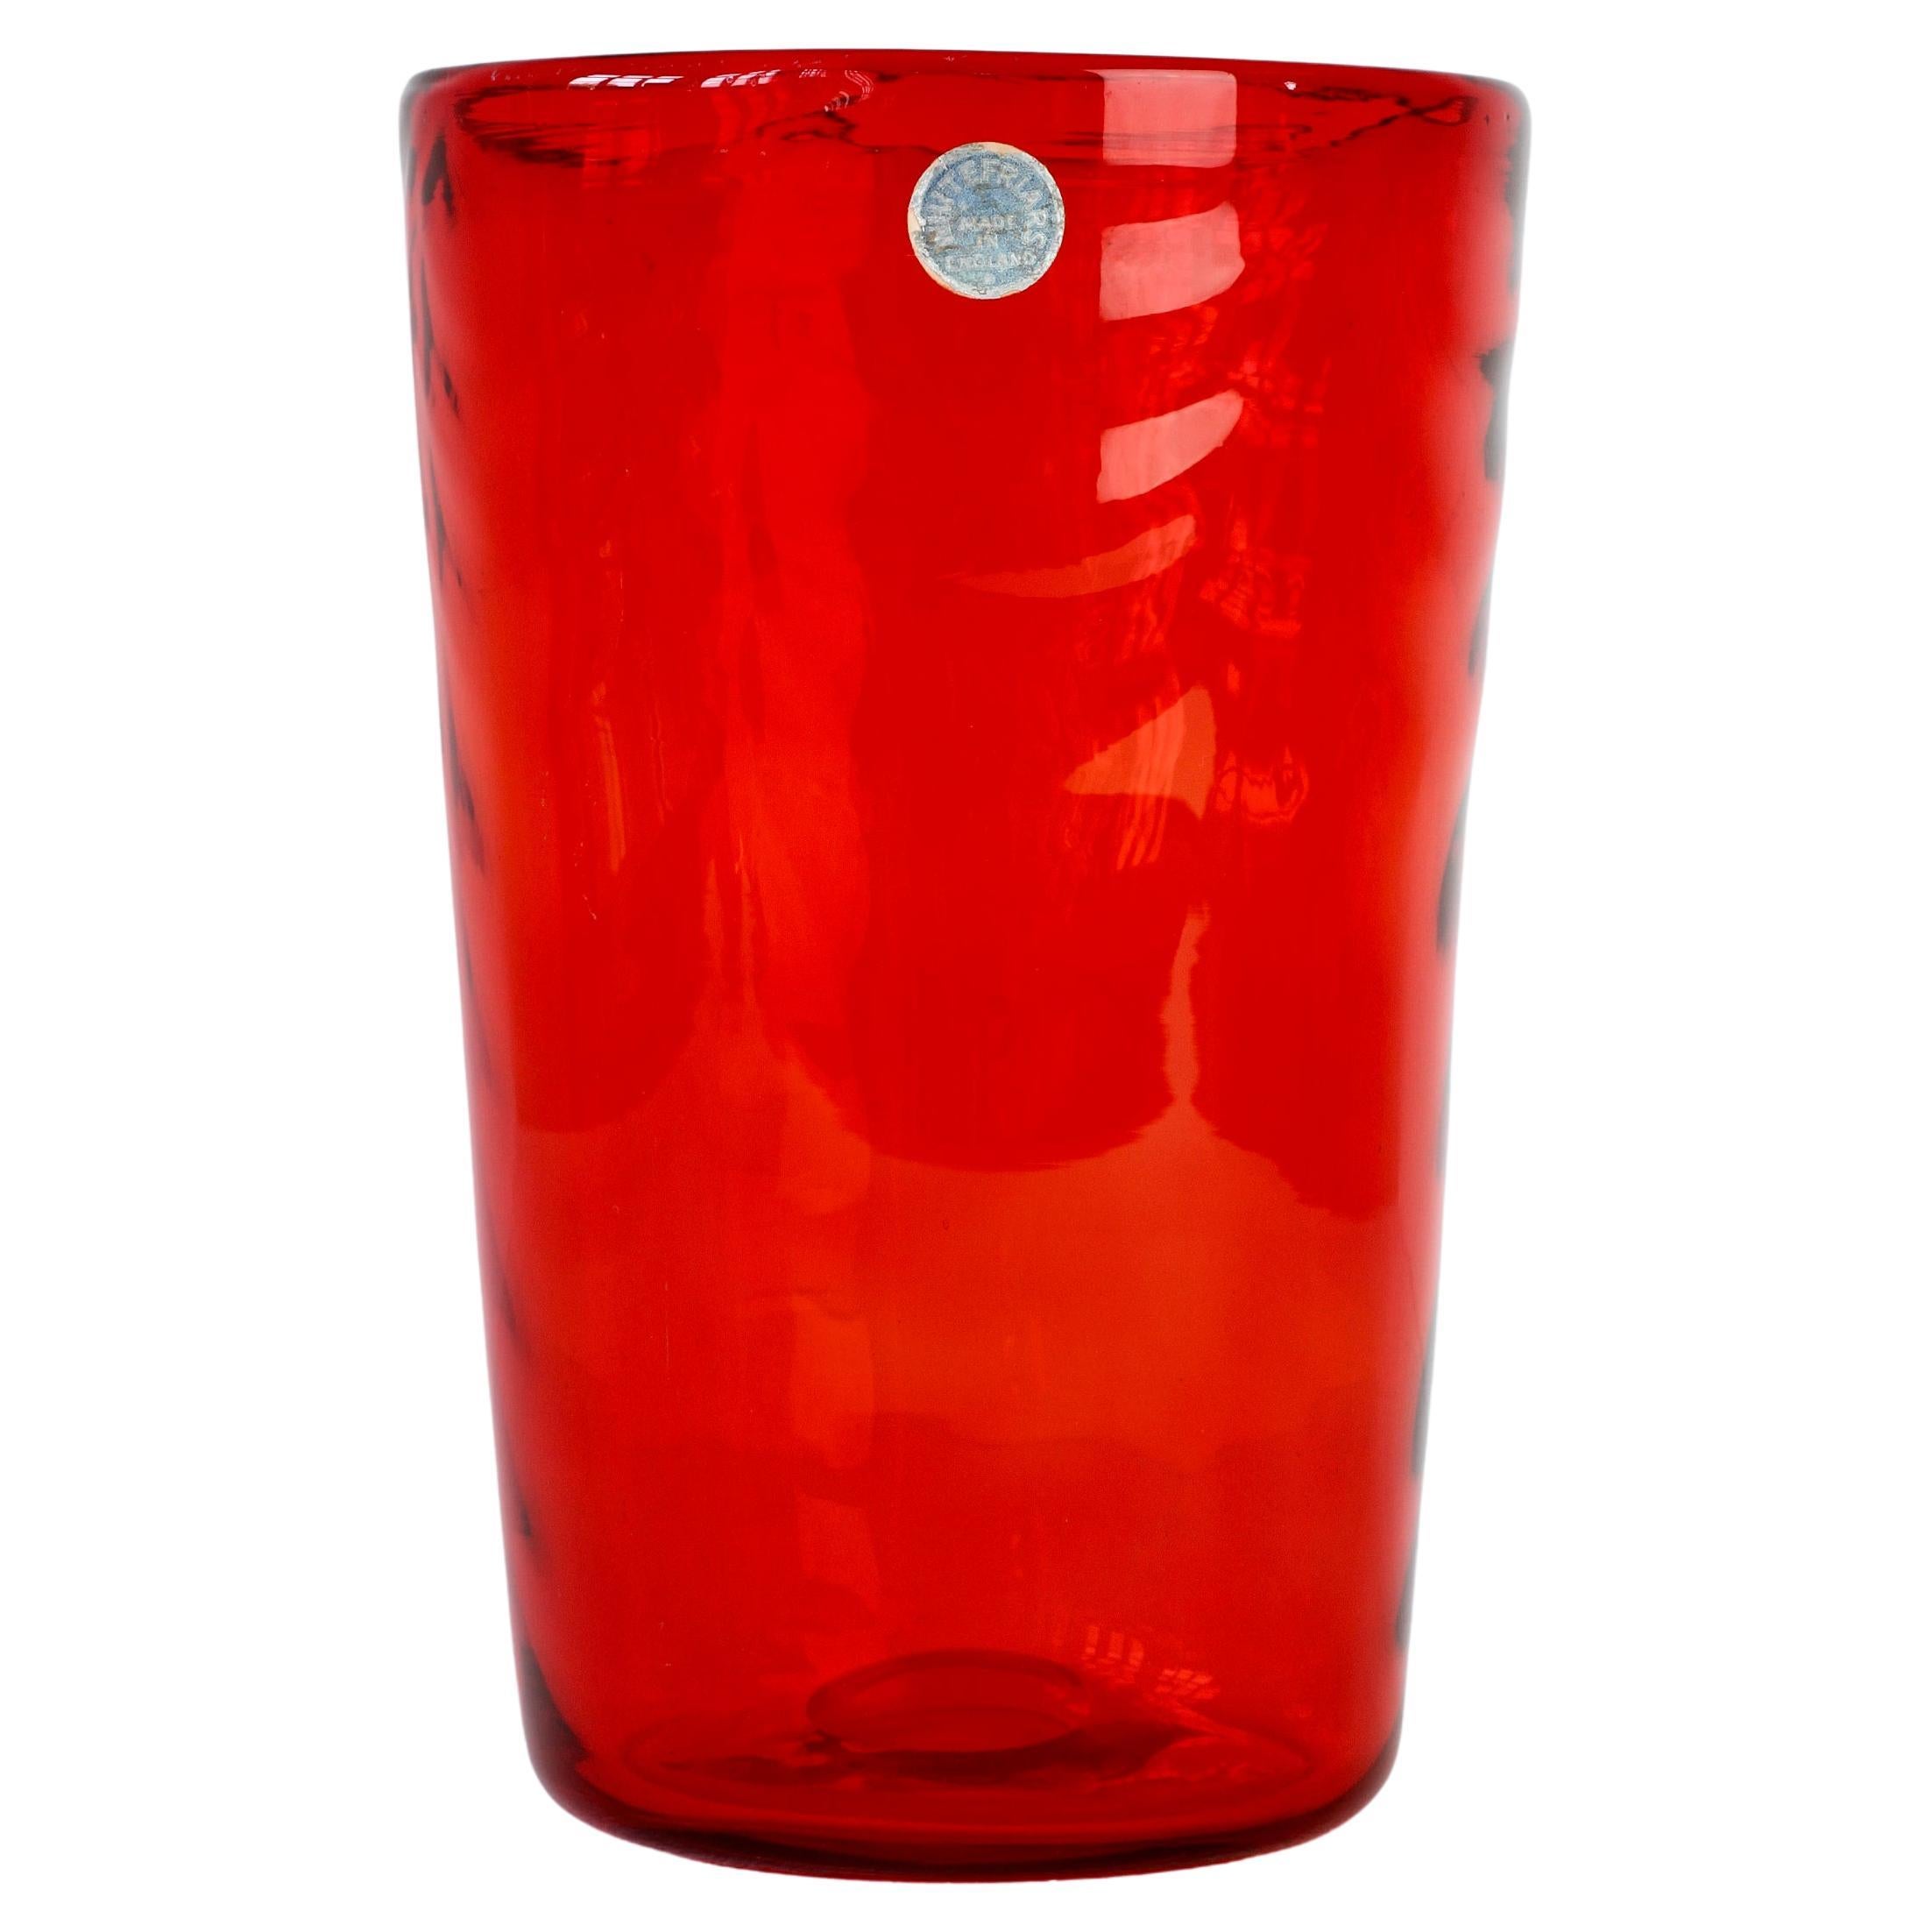 Whitefriars Vintage Vibrant Red Glass Vase by Barnaby Marriott Powel, C. 1940